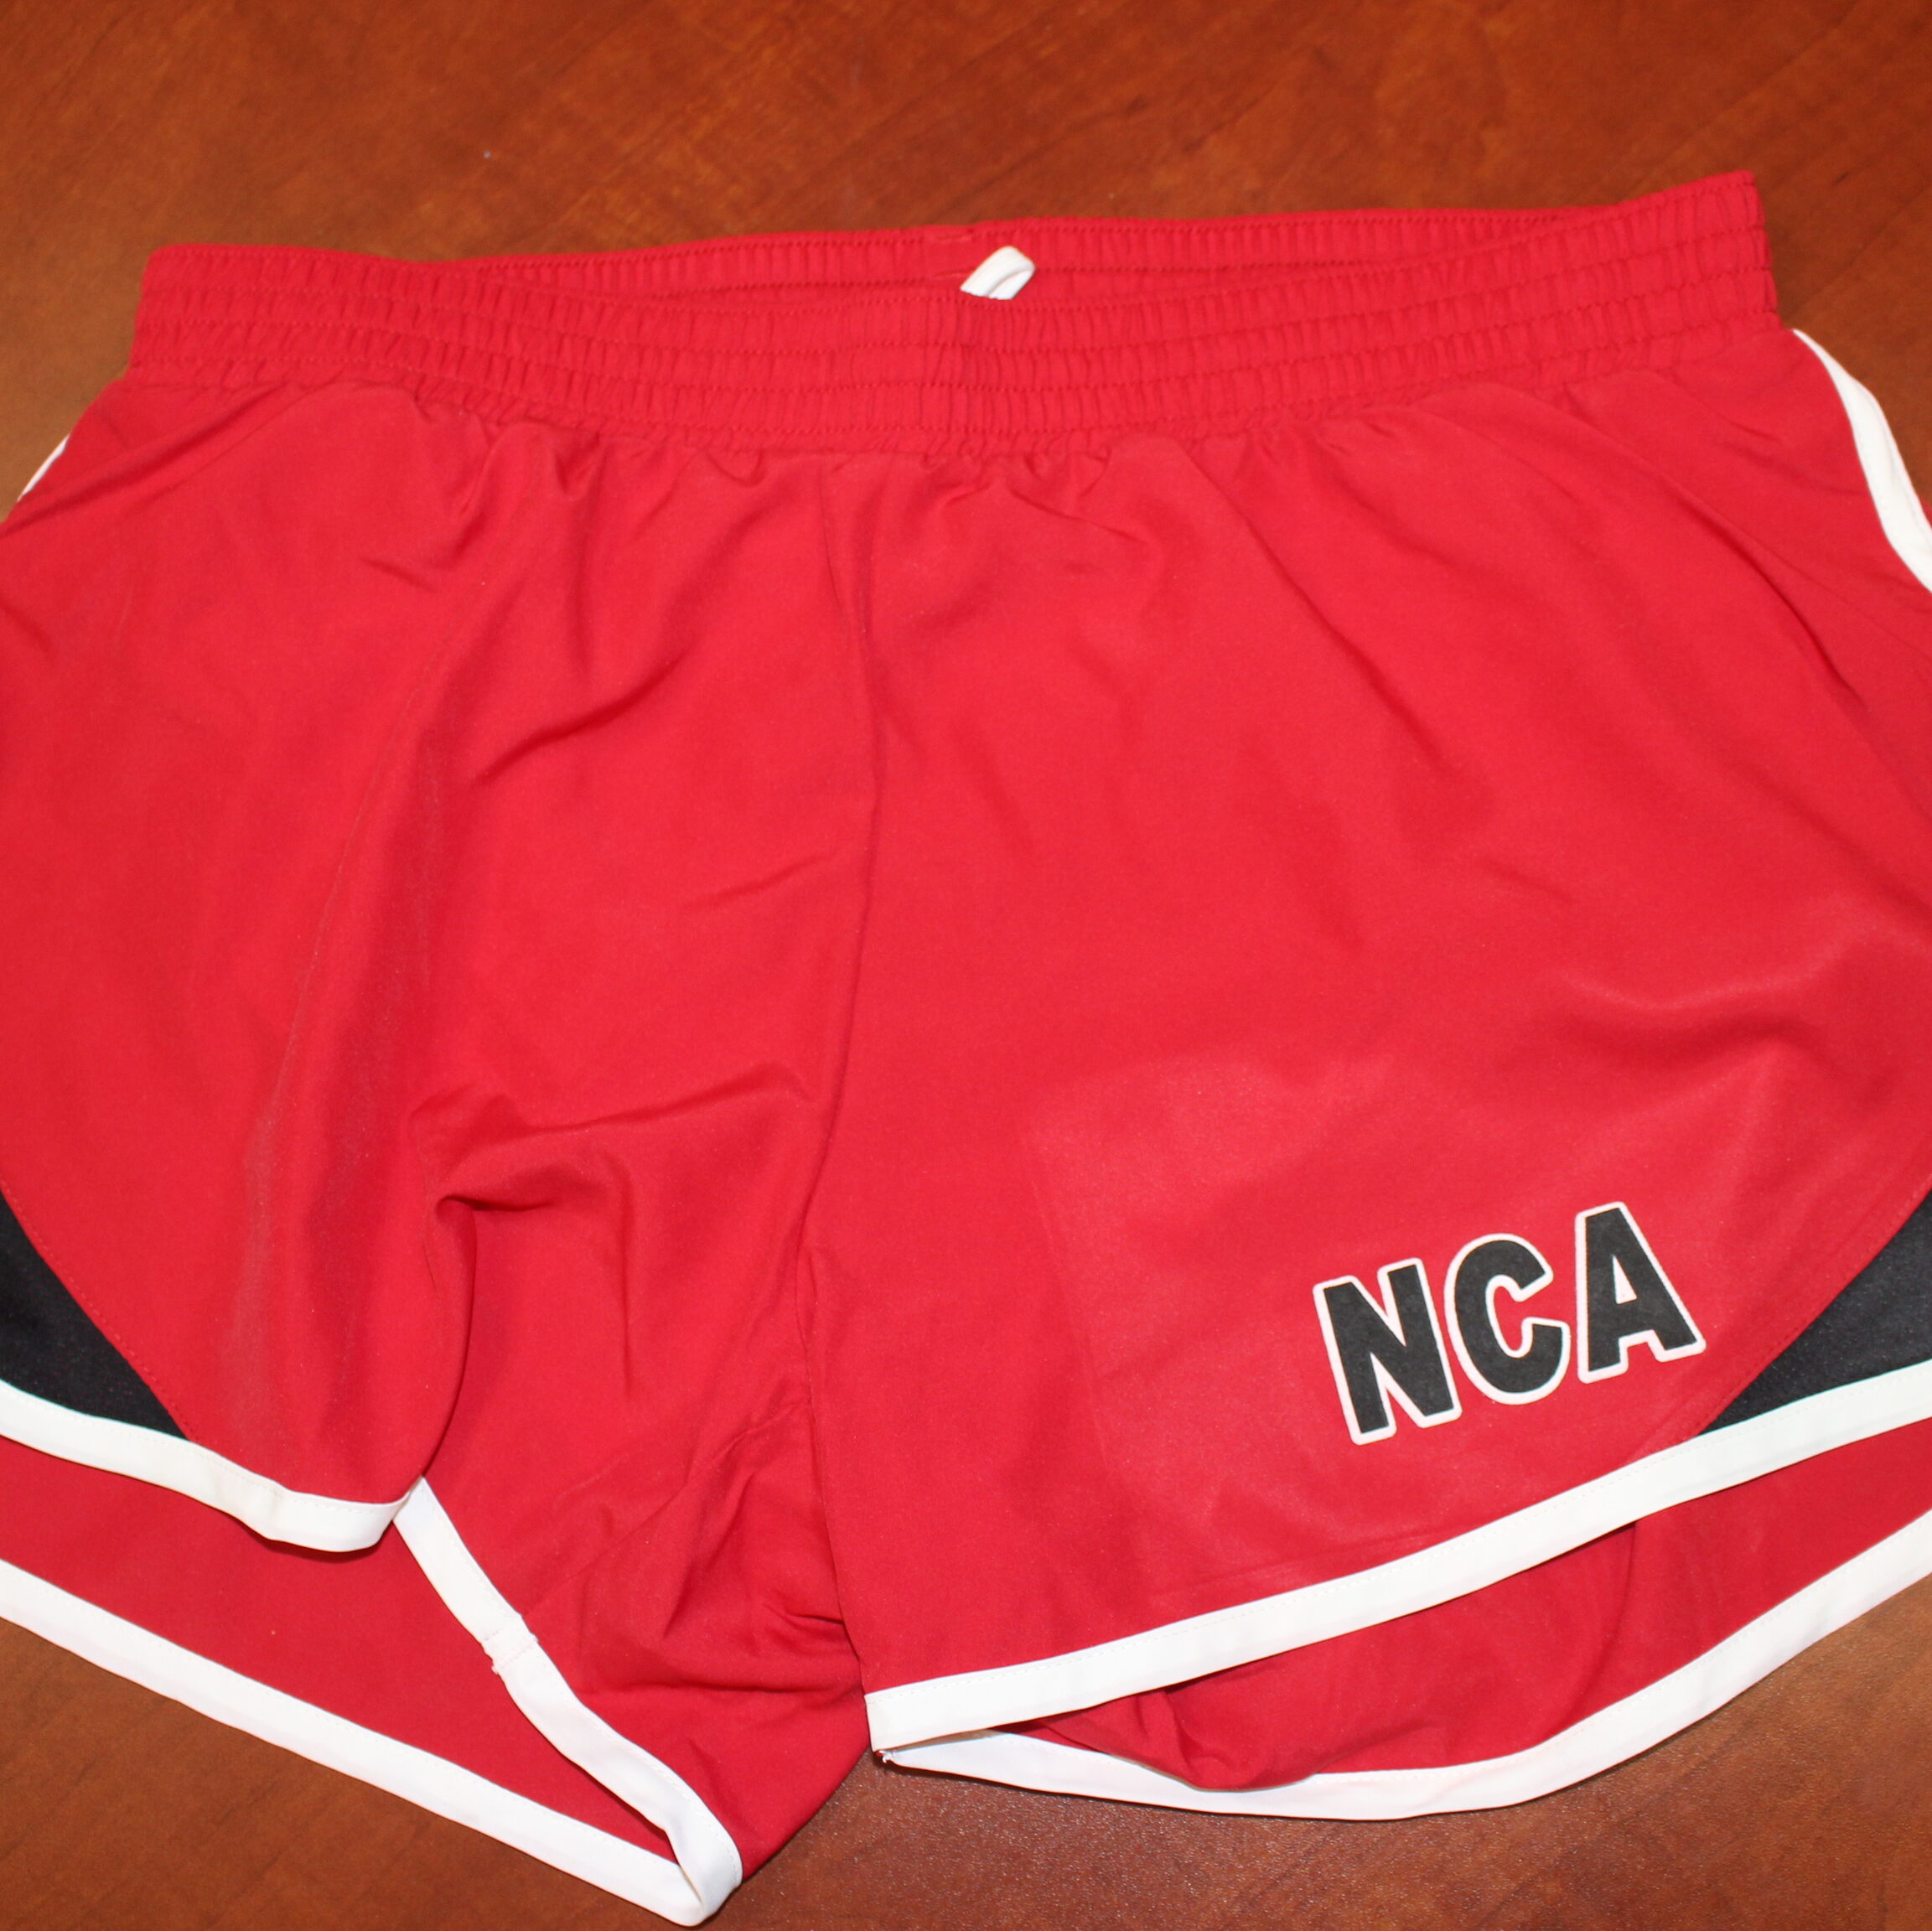 Red running shorts with the letters, "NCA" on them